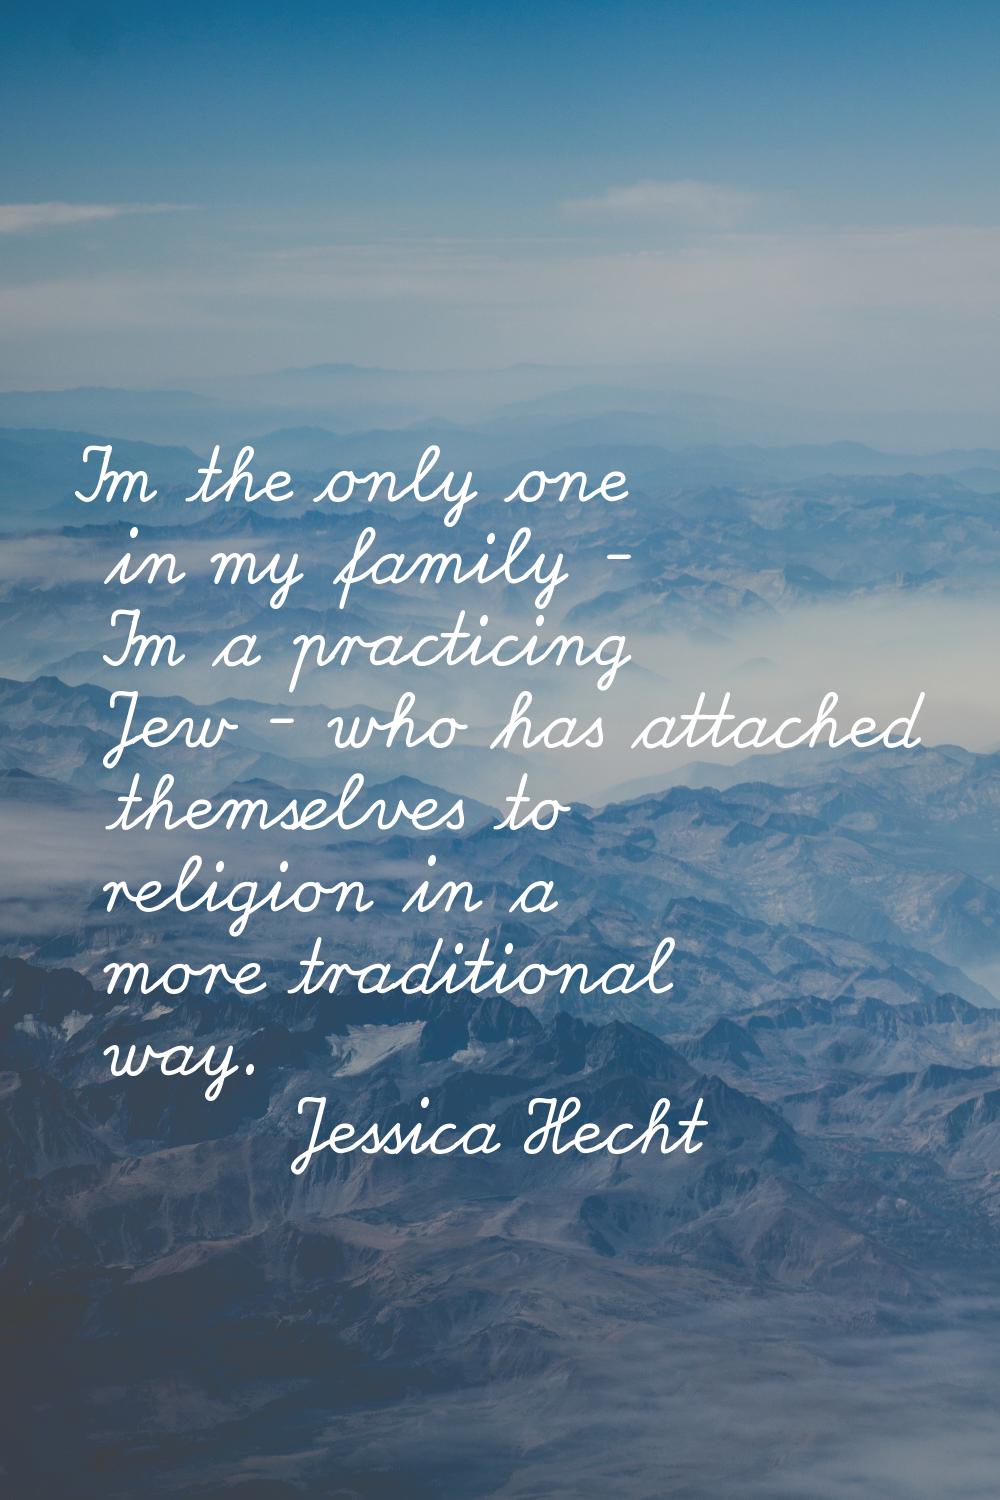 I'm the only one in my family - I'm a practicing Jew - who has attached themselves to religion in a